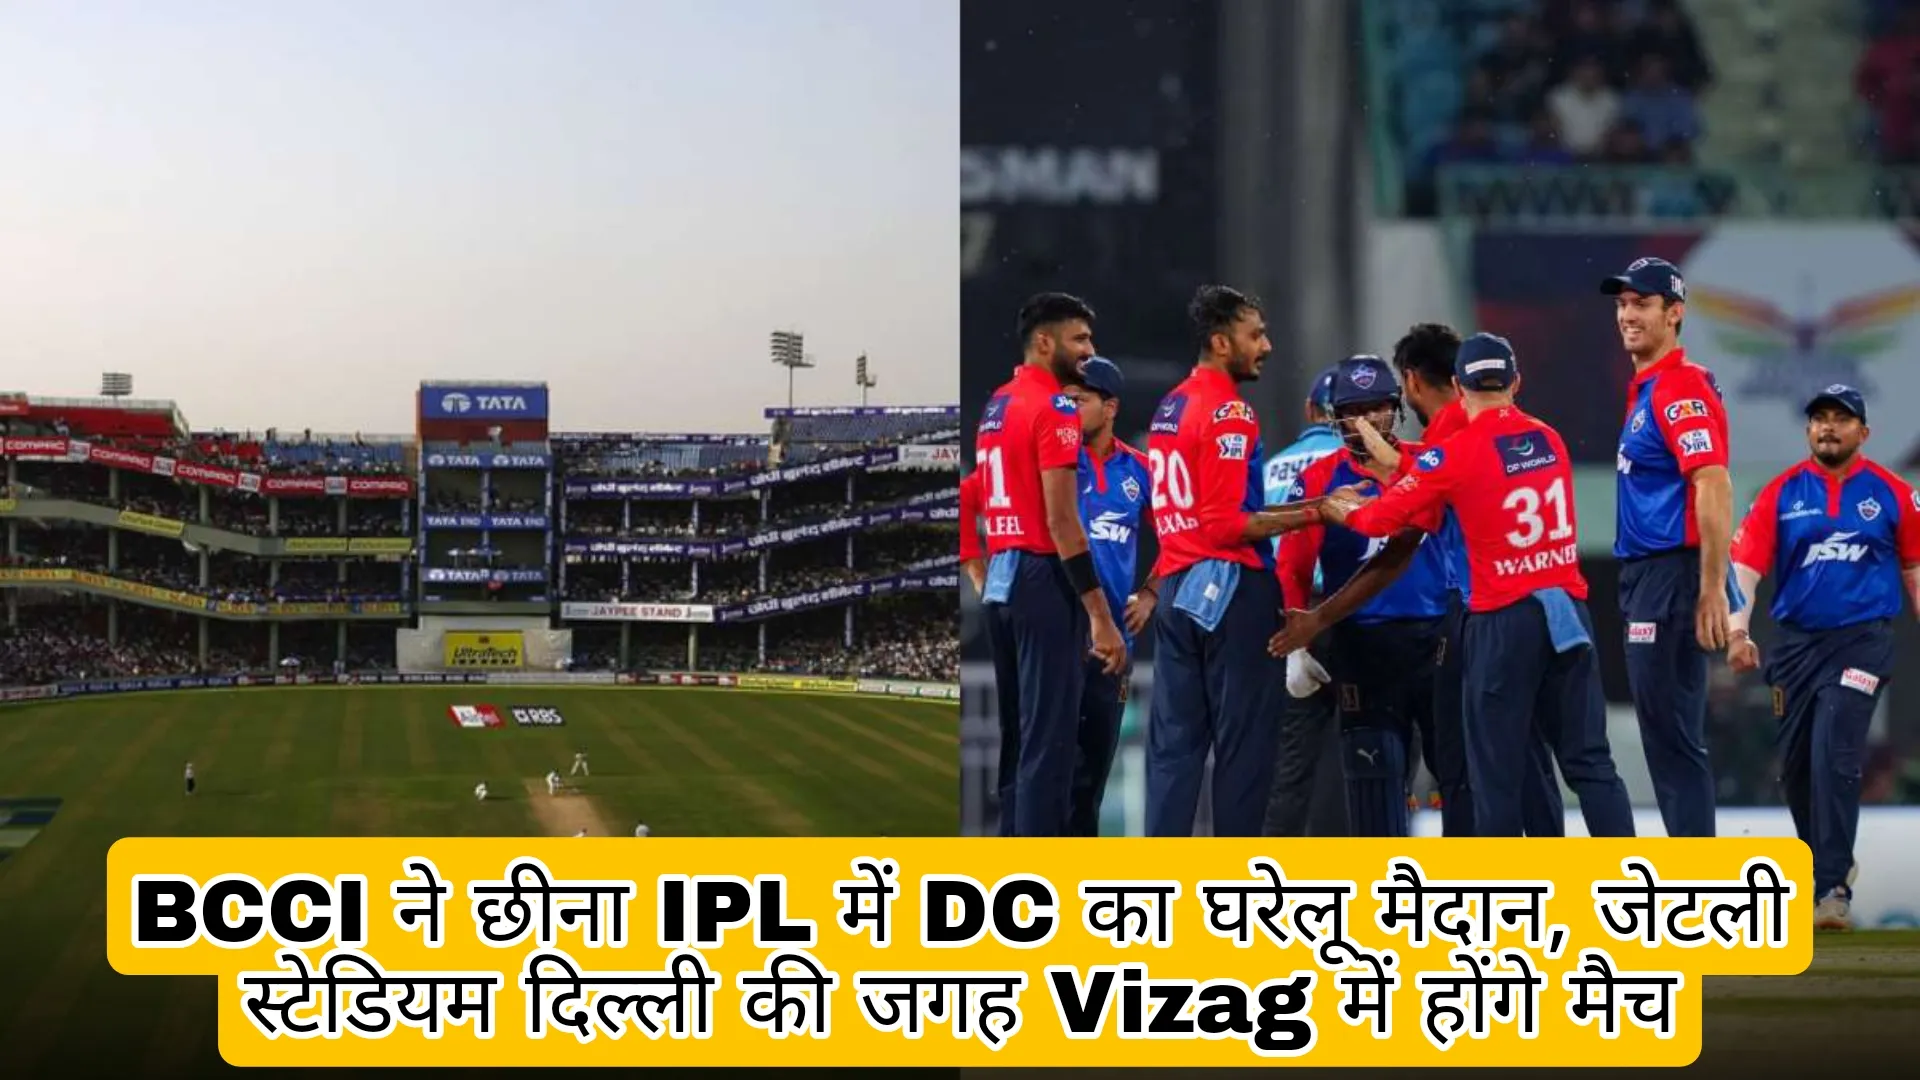 BCCI Took Away DC Home Ground in IPL